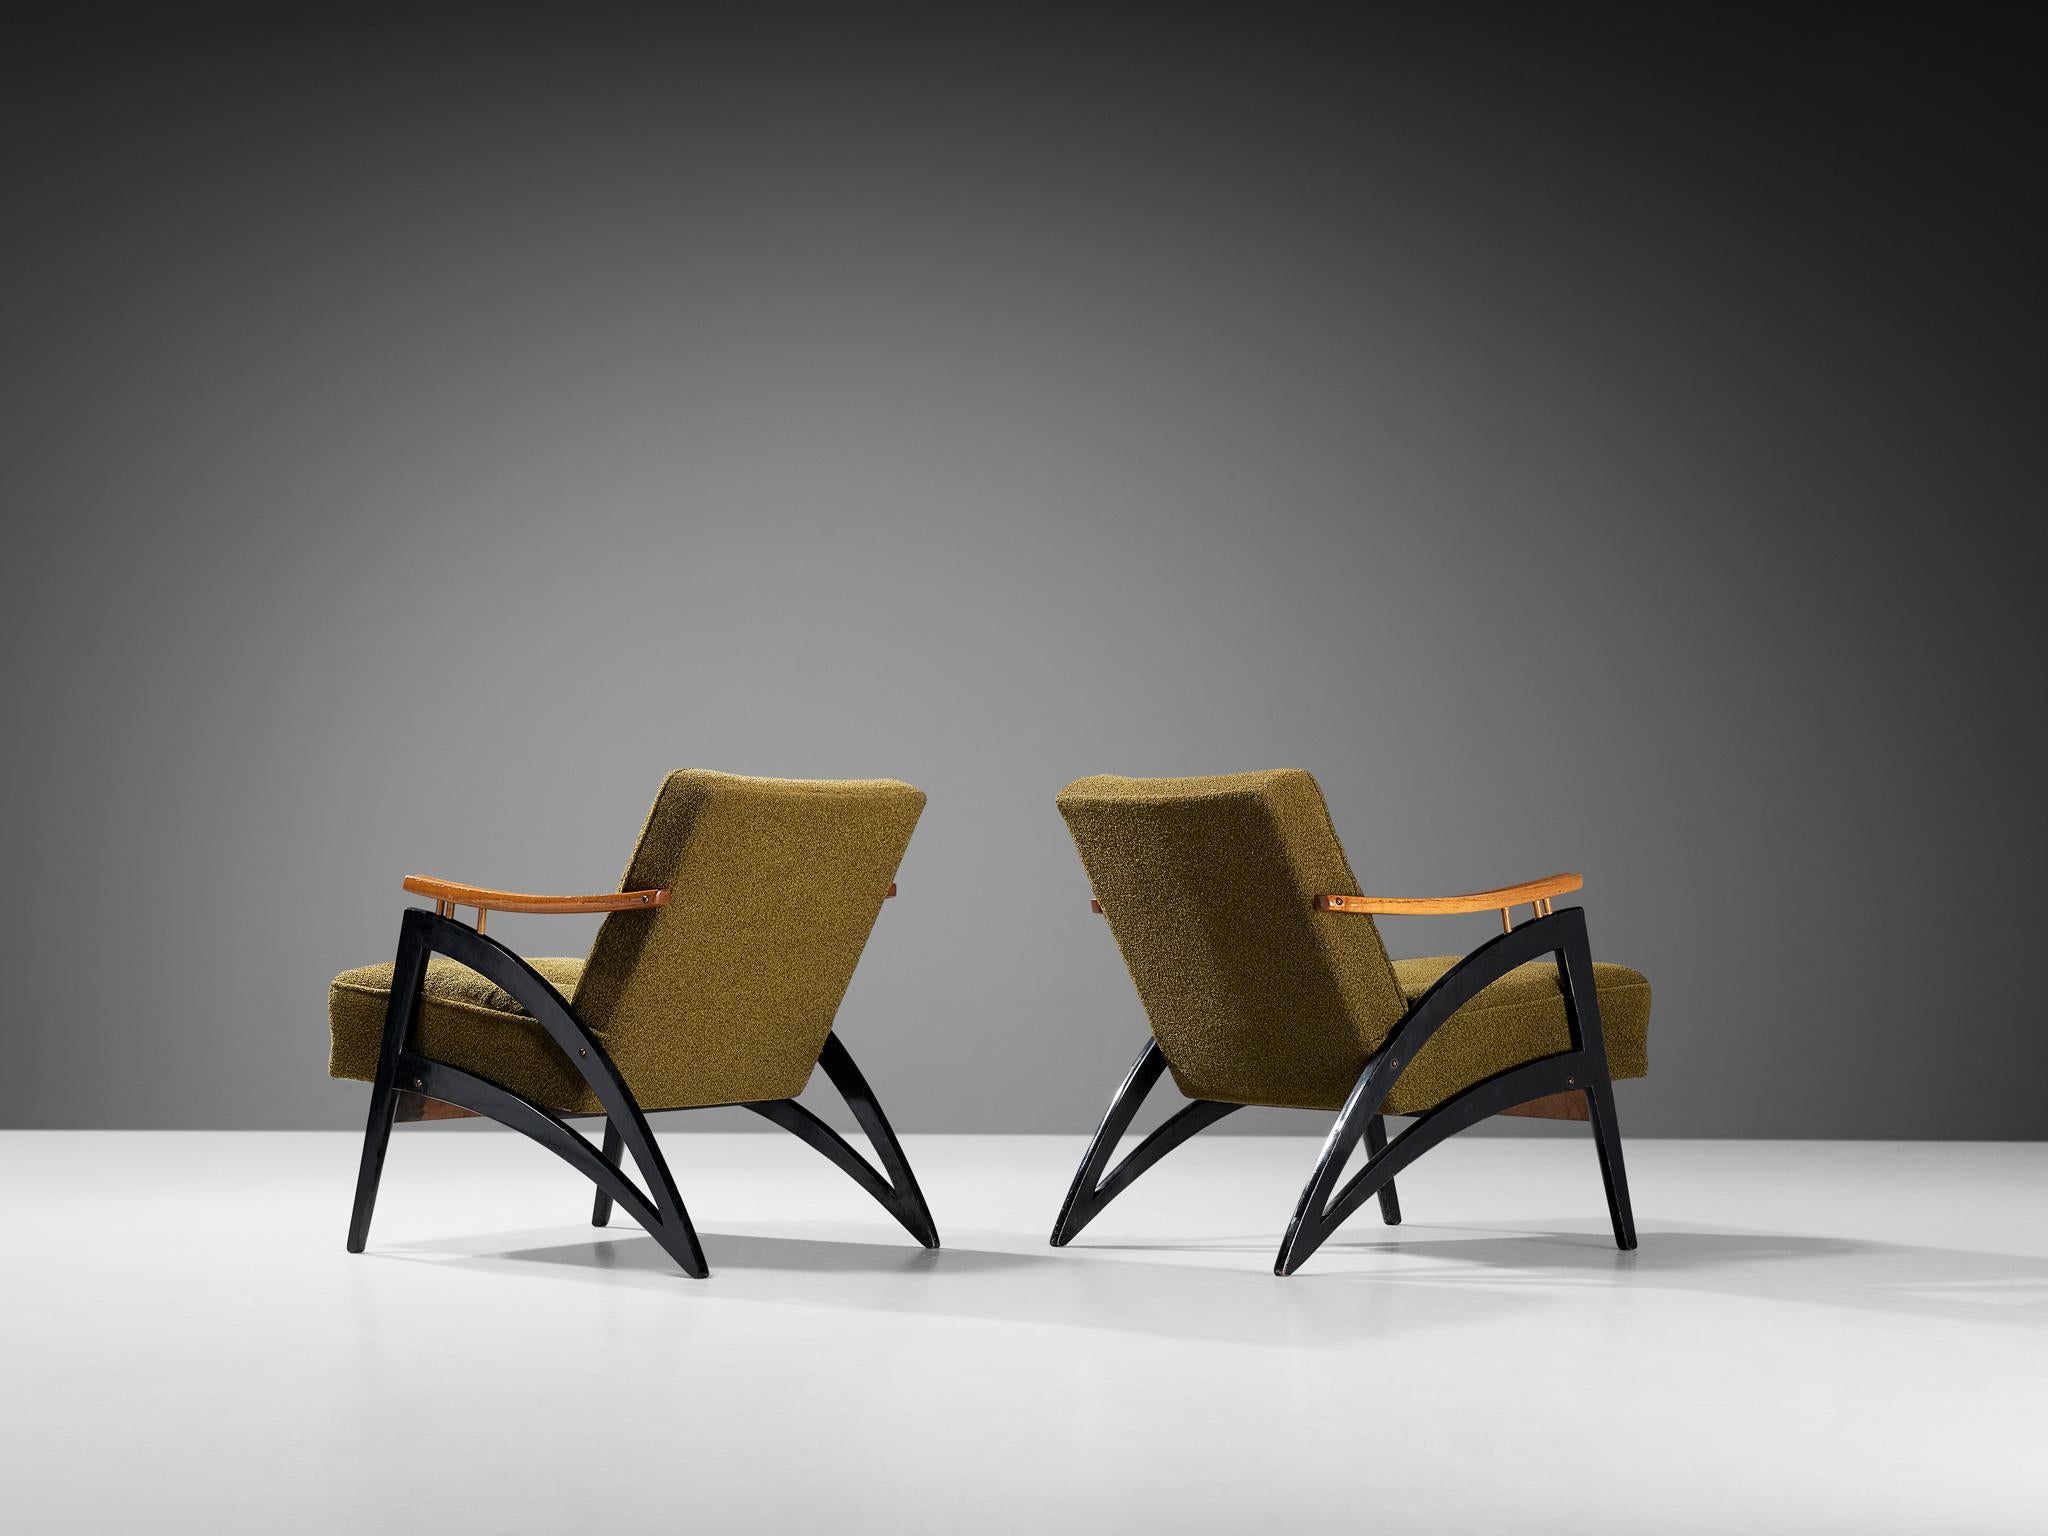 Lounge chairs, birch, lacquered wood, fabric, Italy, 1960s.

Well-shaped Italian lounge chairs in an olive green upholstery. The lower part of the legs are in a sharp V shape and executed in black lacquered wood. The armrests are made from birch